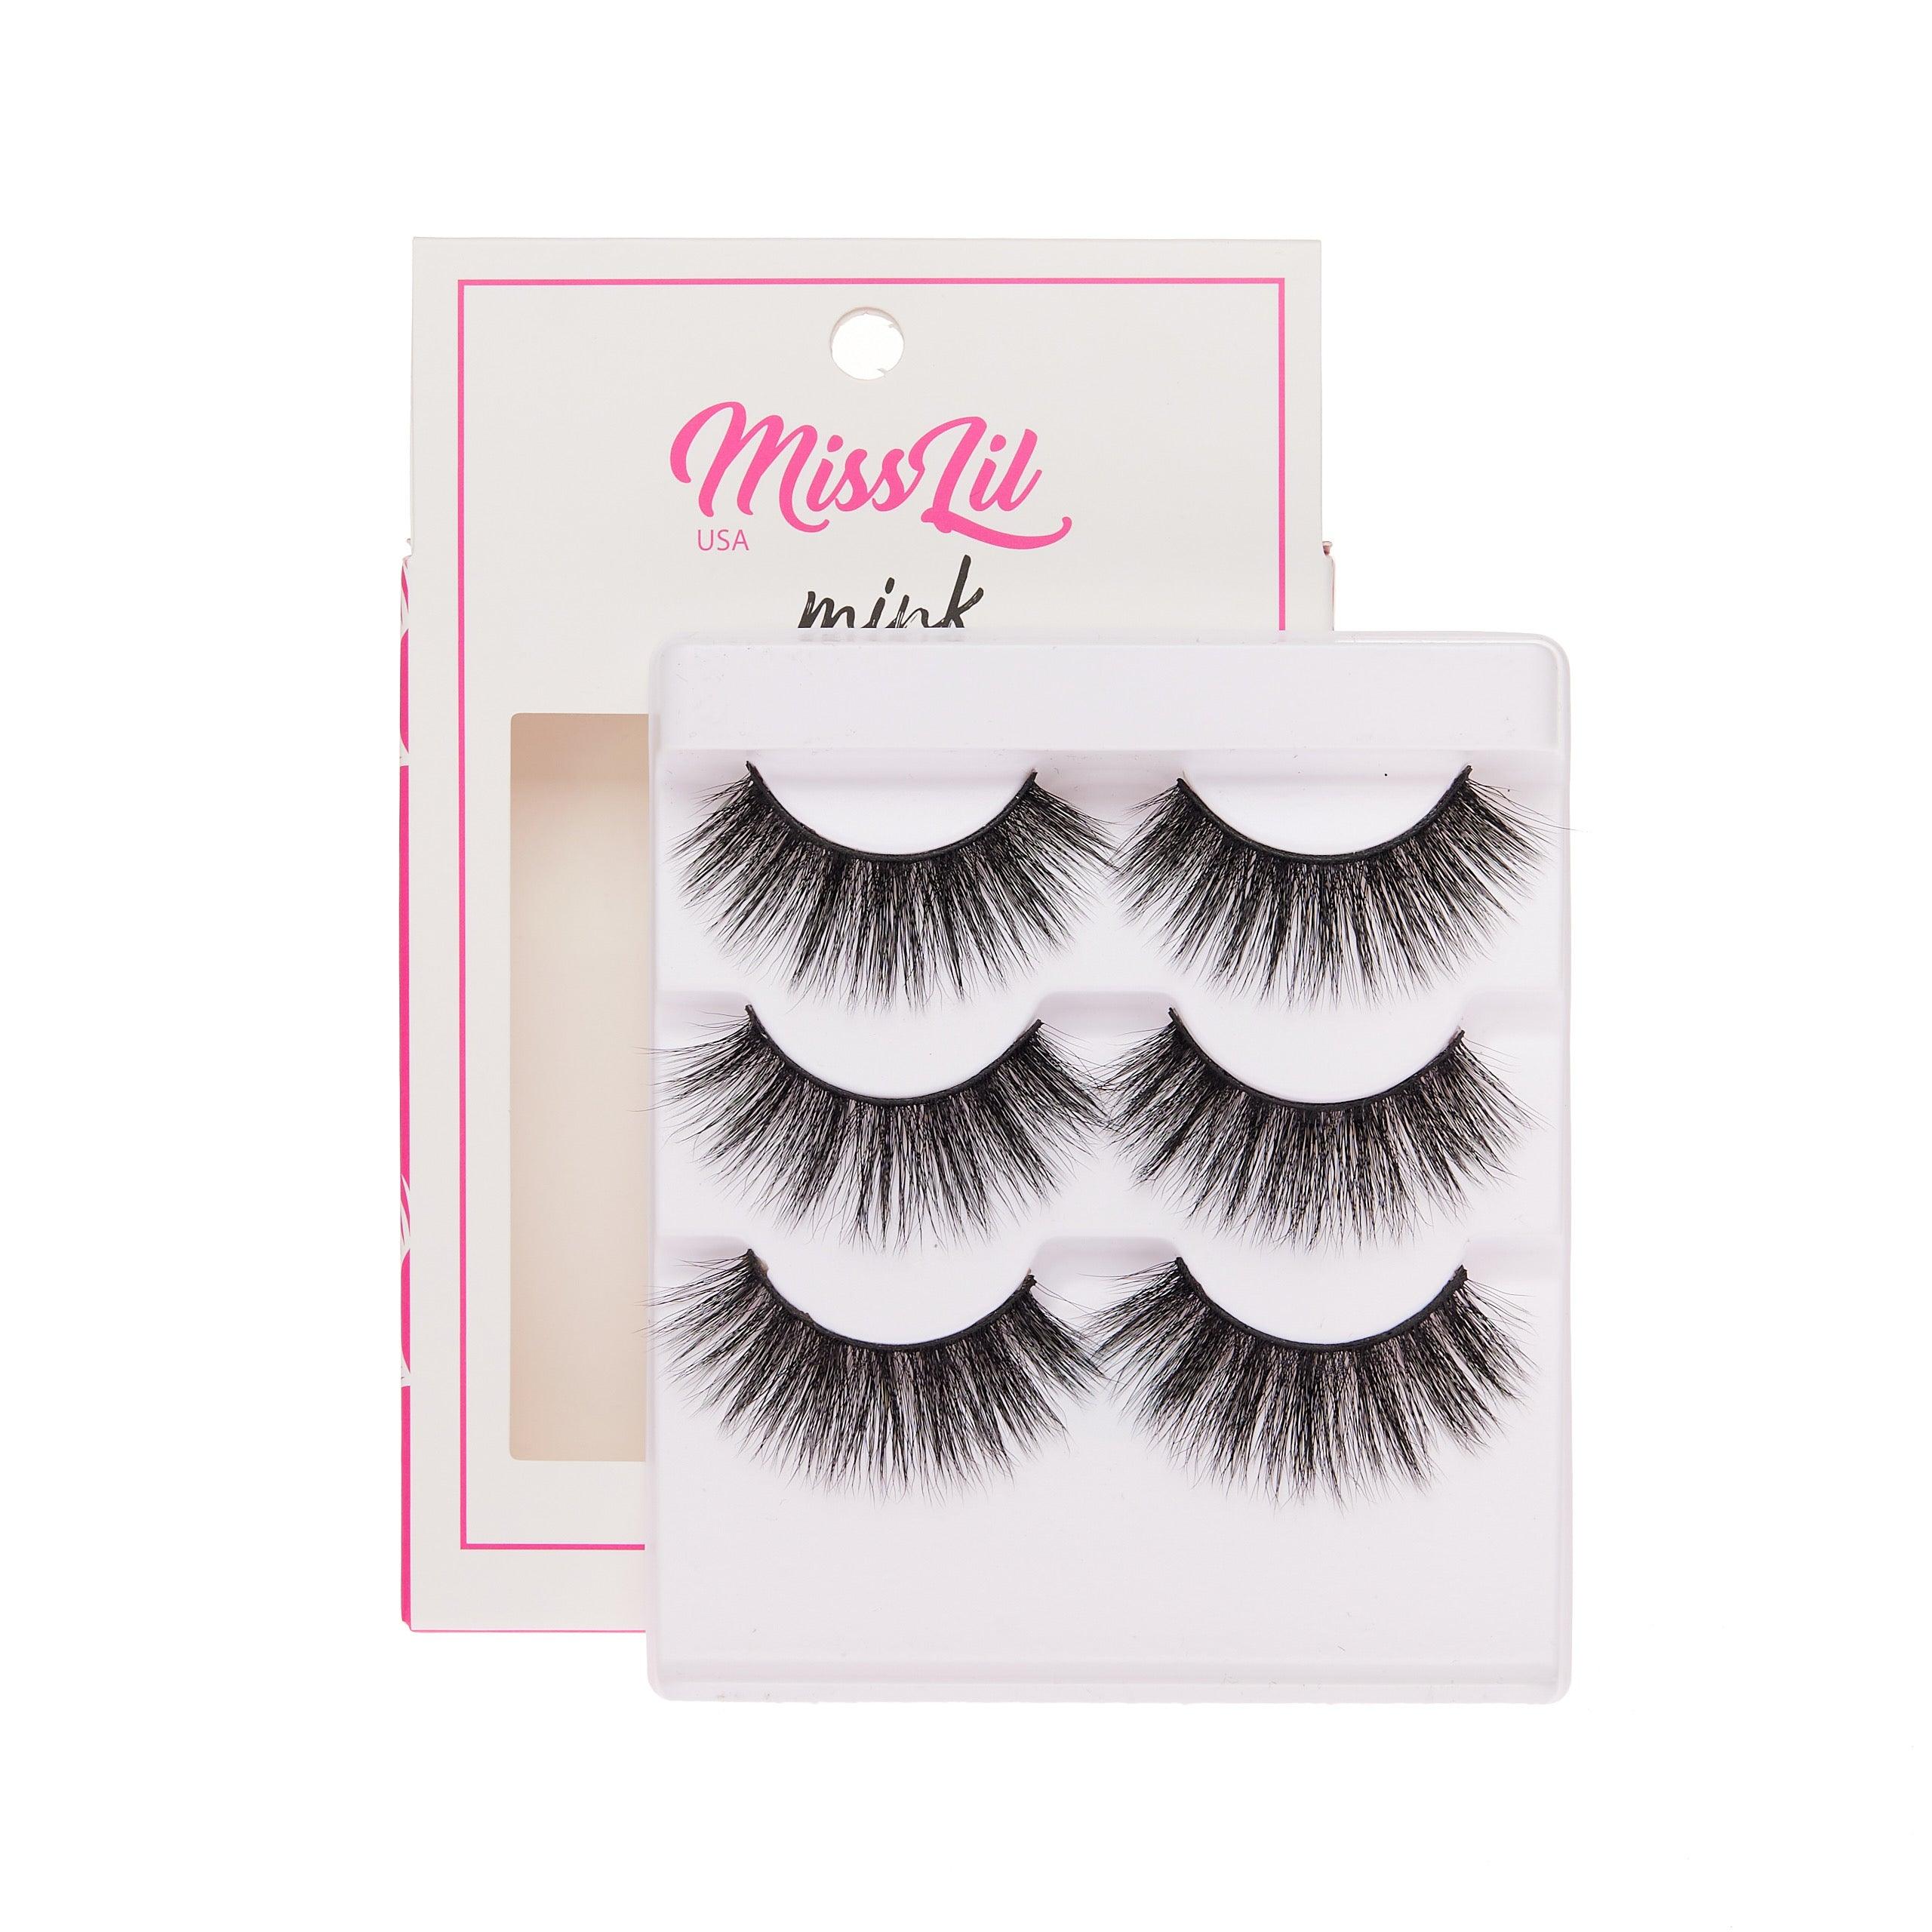 3-Pair Faux Mink Effect Eyelashes - Lash Party Collection #1 - Pack of 3 - Miss Lil USA